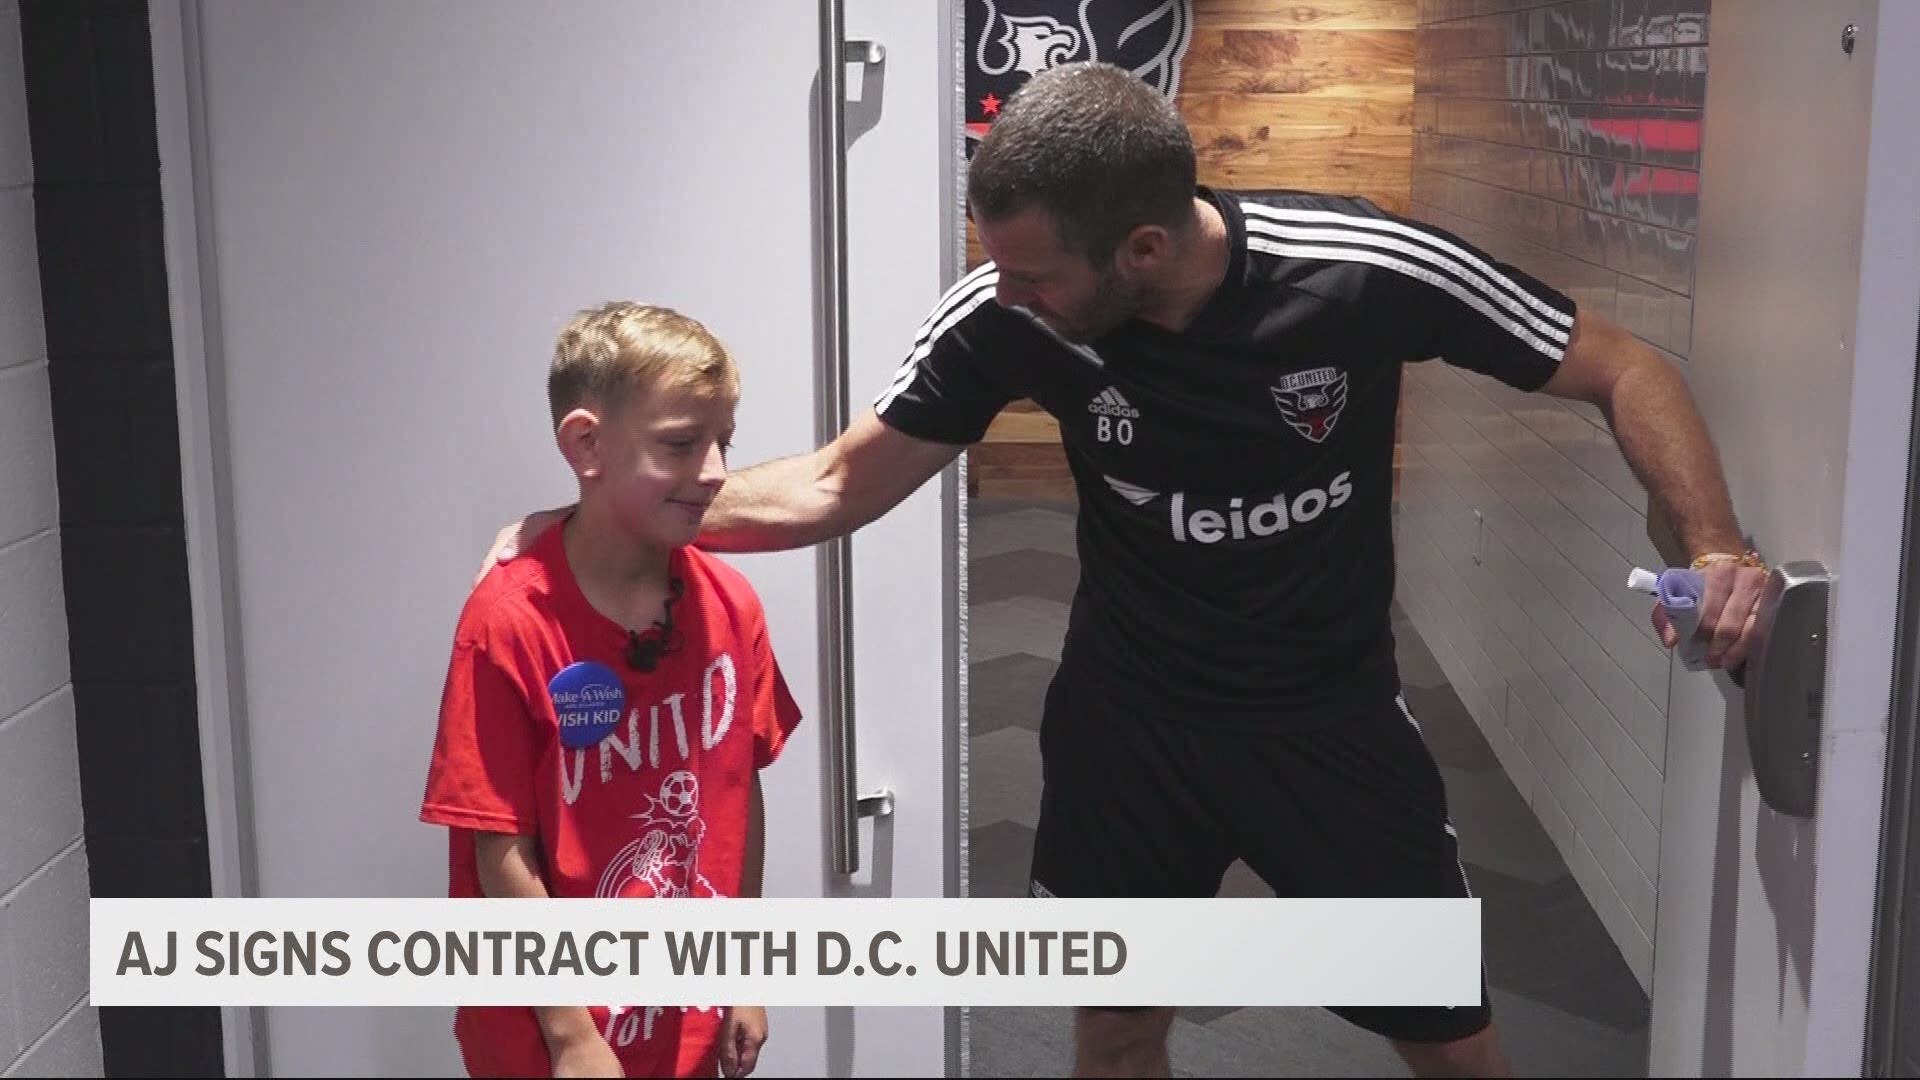 D.C. United signed 8-year old AJ to a five-year contract as part of his wish with the Make-A-Wish Foundation